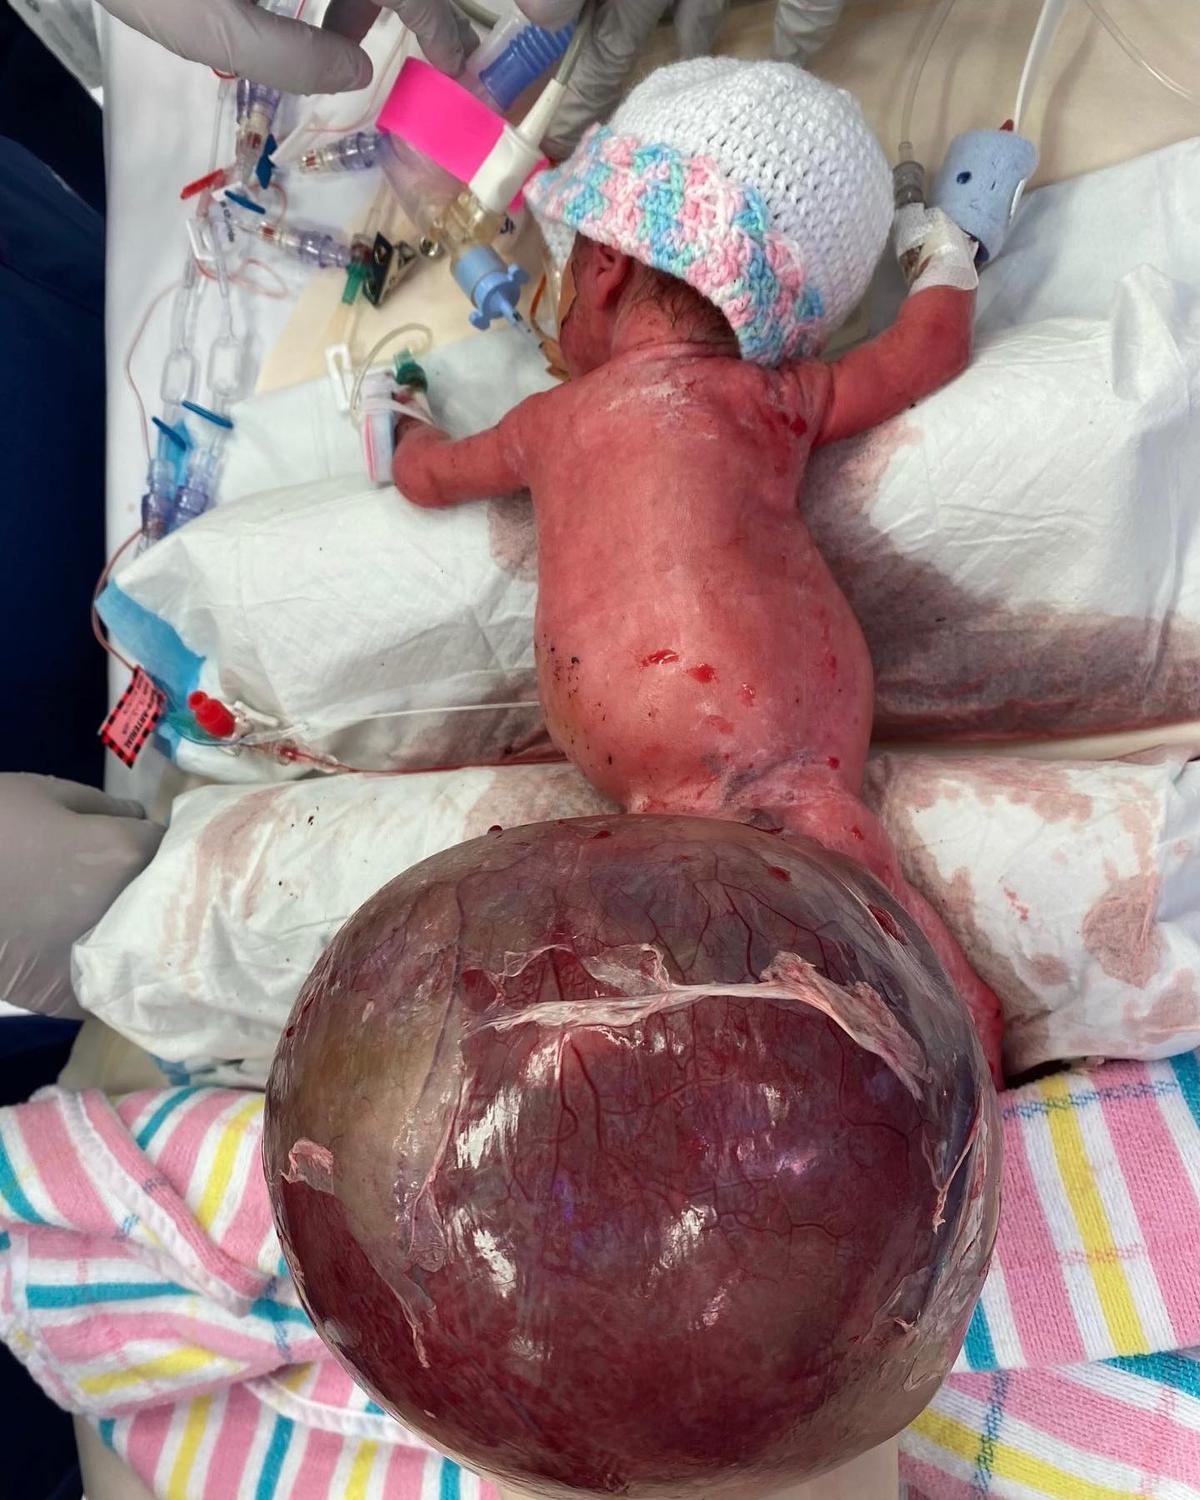 Saylor of North Lakes, Queensland was born with sacrococcygeal teratoma. (Courtesy of <a href="https://www.facebook.com/MaterMothers/">Mater Mothers</a>)